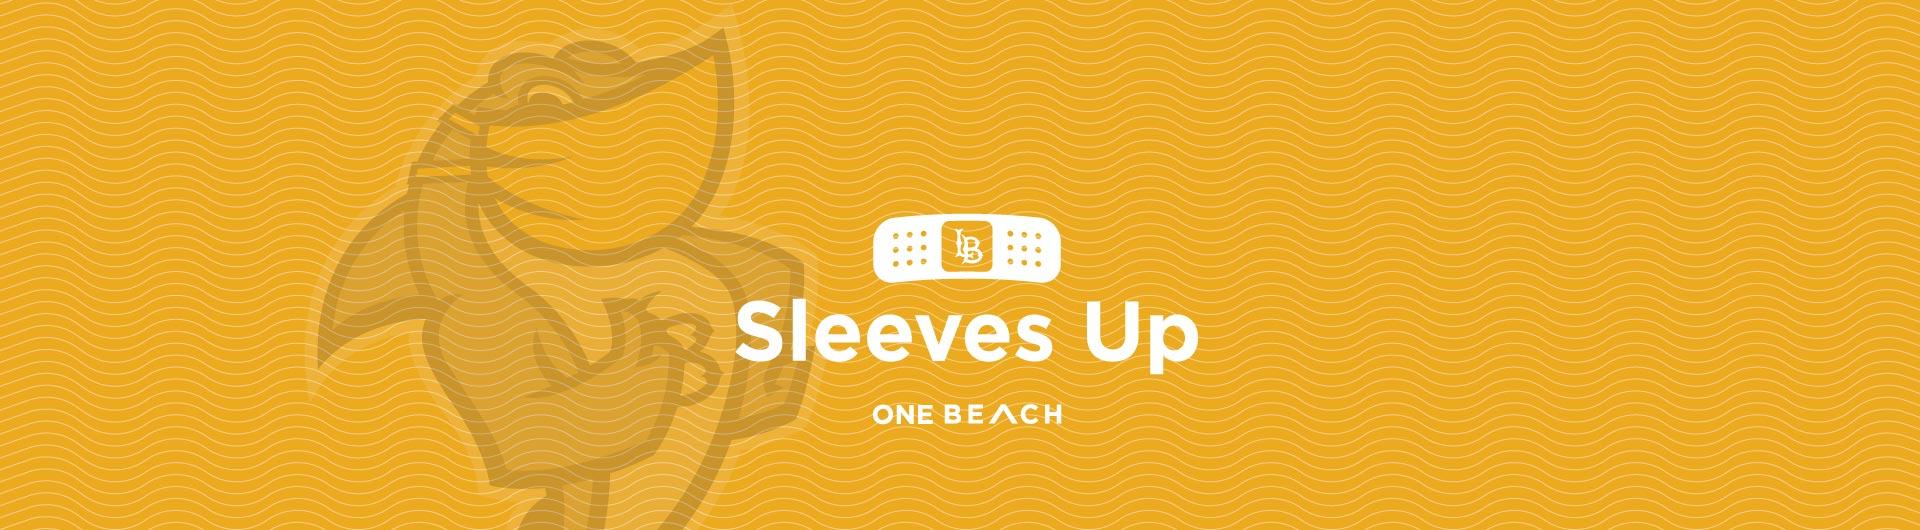 Sleeves Up - OneBeach